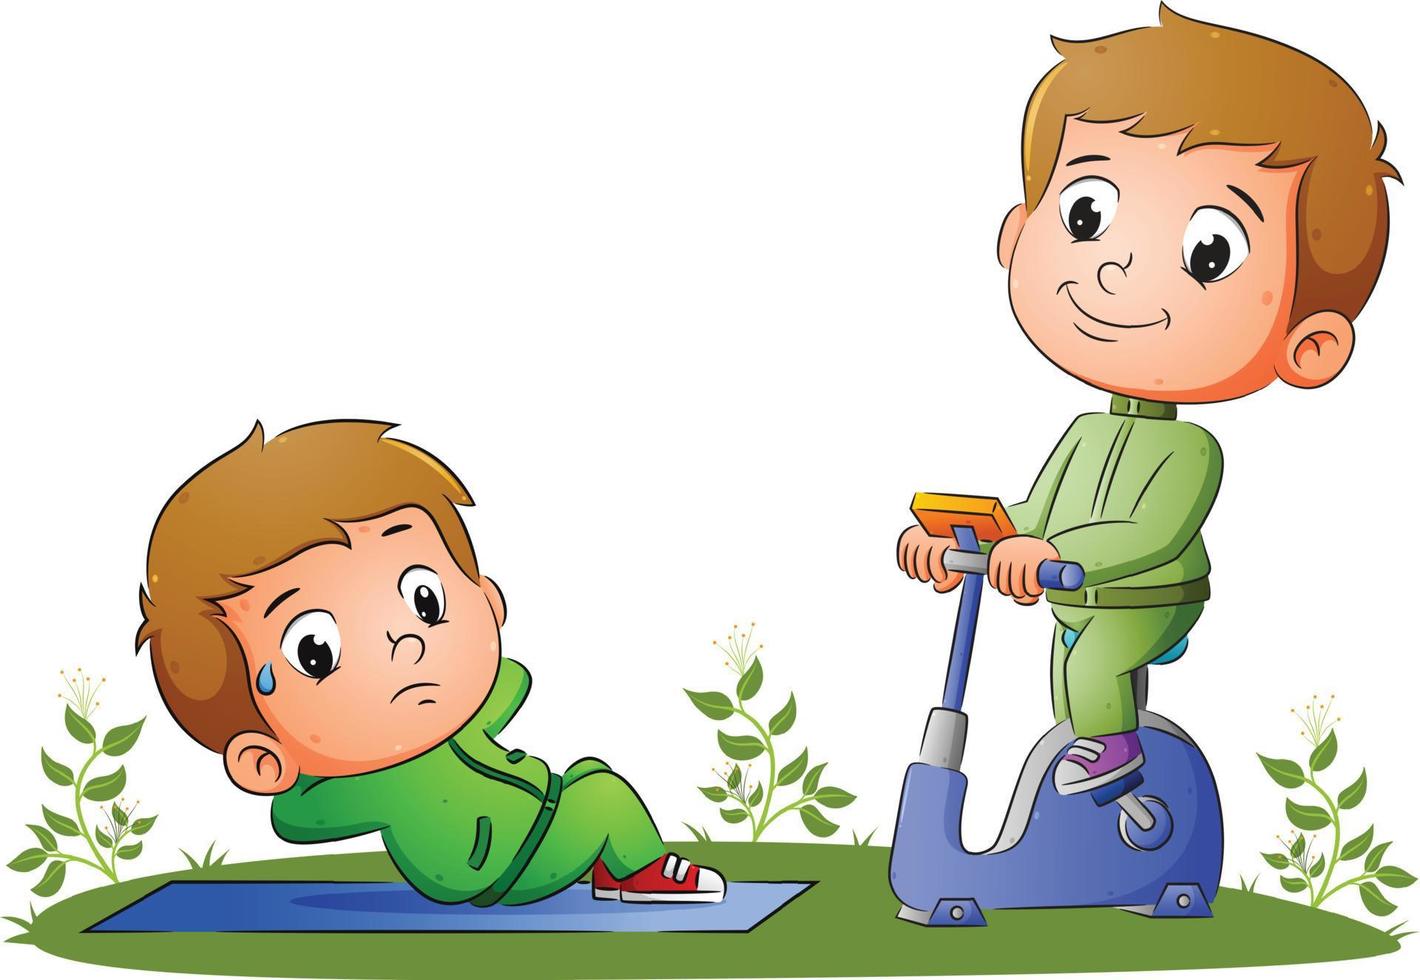 The boys are doing the sport with sit up and cycling in the static bike of illustration vector